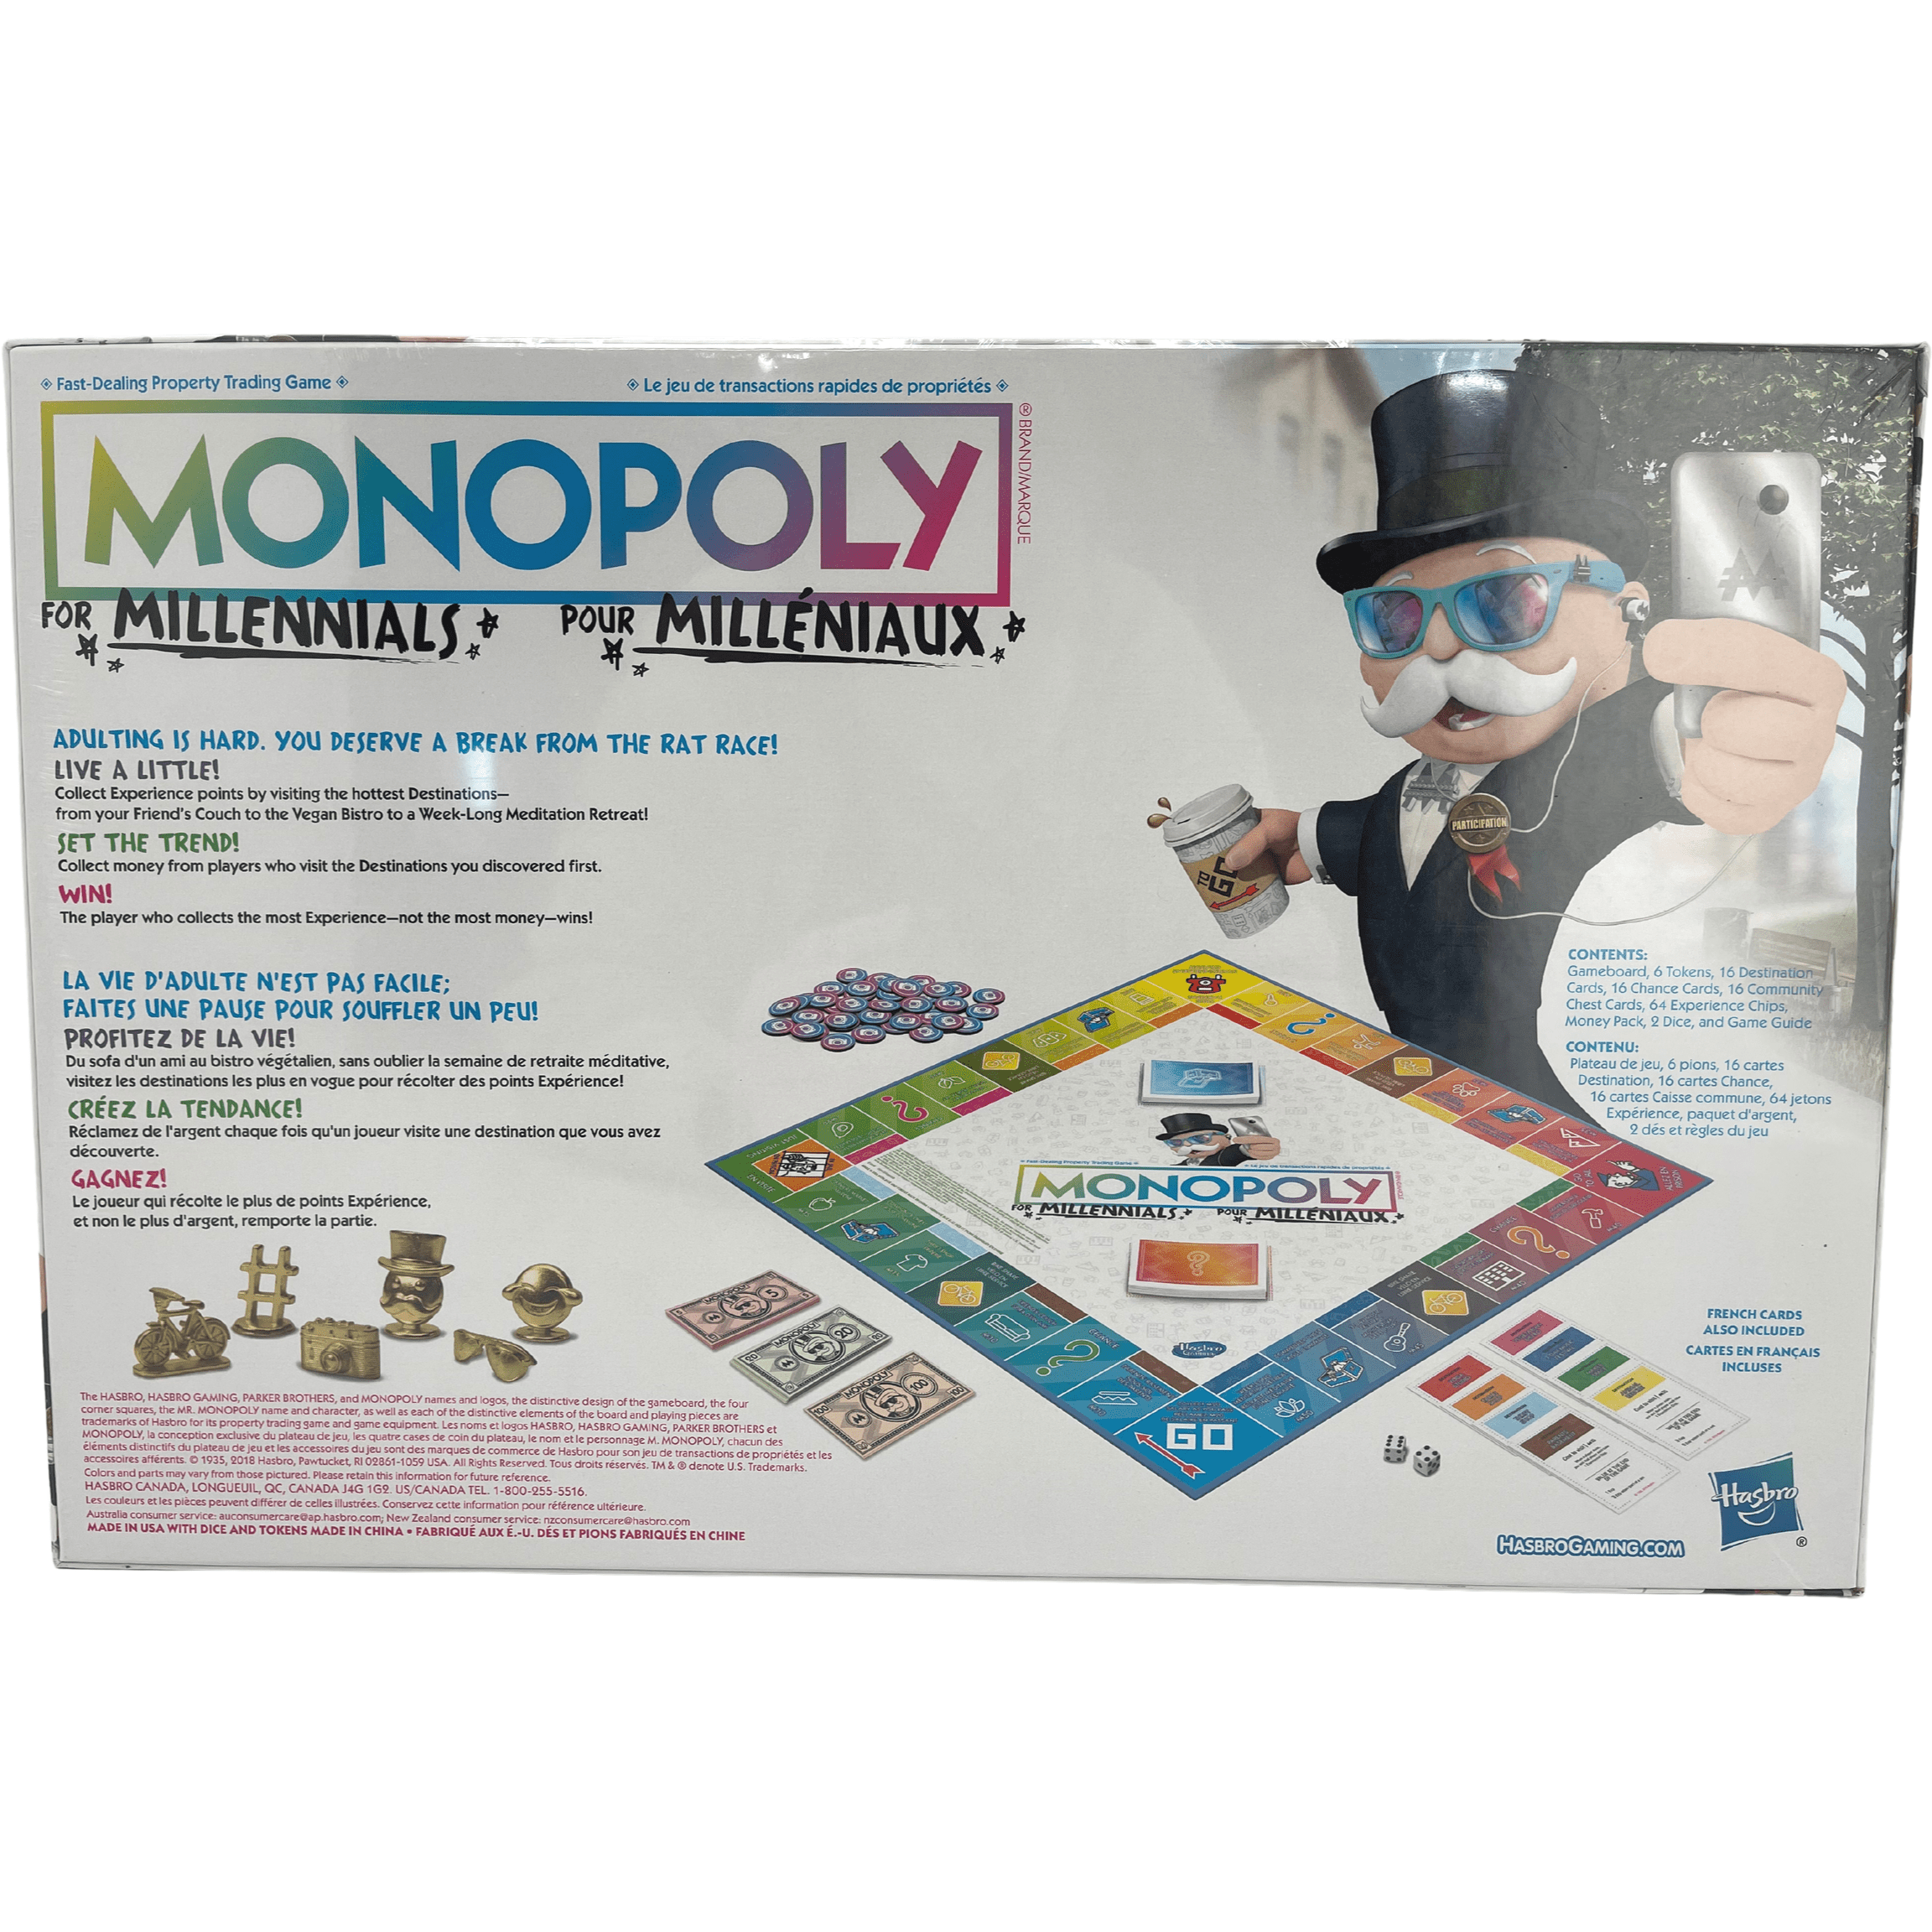 Monopoly "For Millennials" Board Game / Modern Monopoly Game / 2 to 4 Players / Complete Game